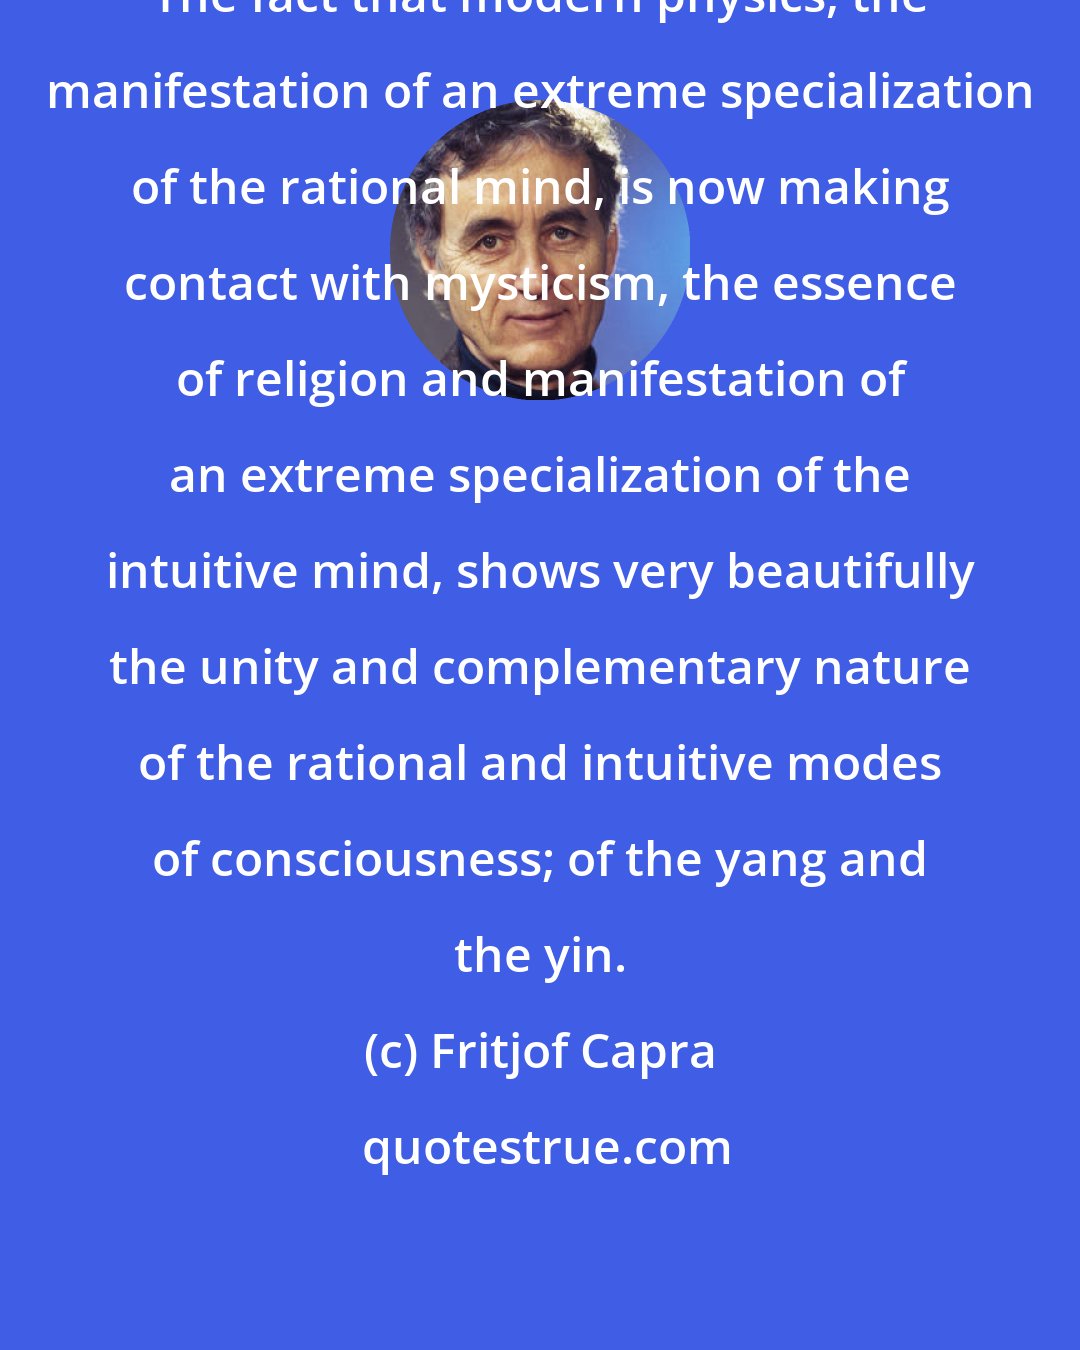 Fritjof Capra: The fact that modern physics, the manifestation of an extreme specialization of the rational mind, is now making contact with mysticism, the essence of religion and manifestation of an extreme specialization of the intuitive mind, shows very beautifully the unity and complementary nature of the rational and intuitive modes of consciousness; of the yang and the yin.